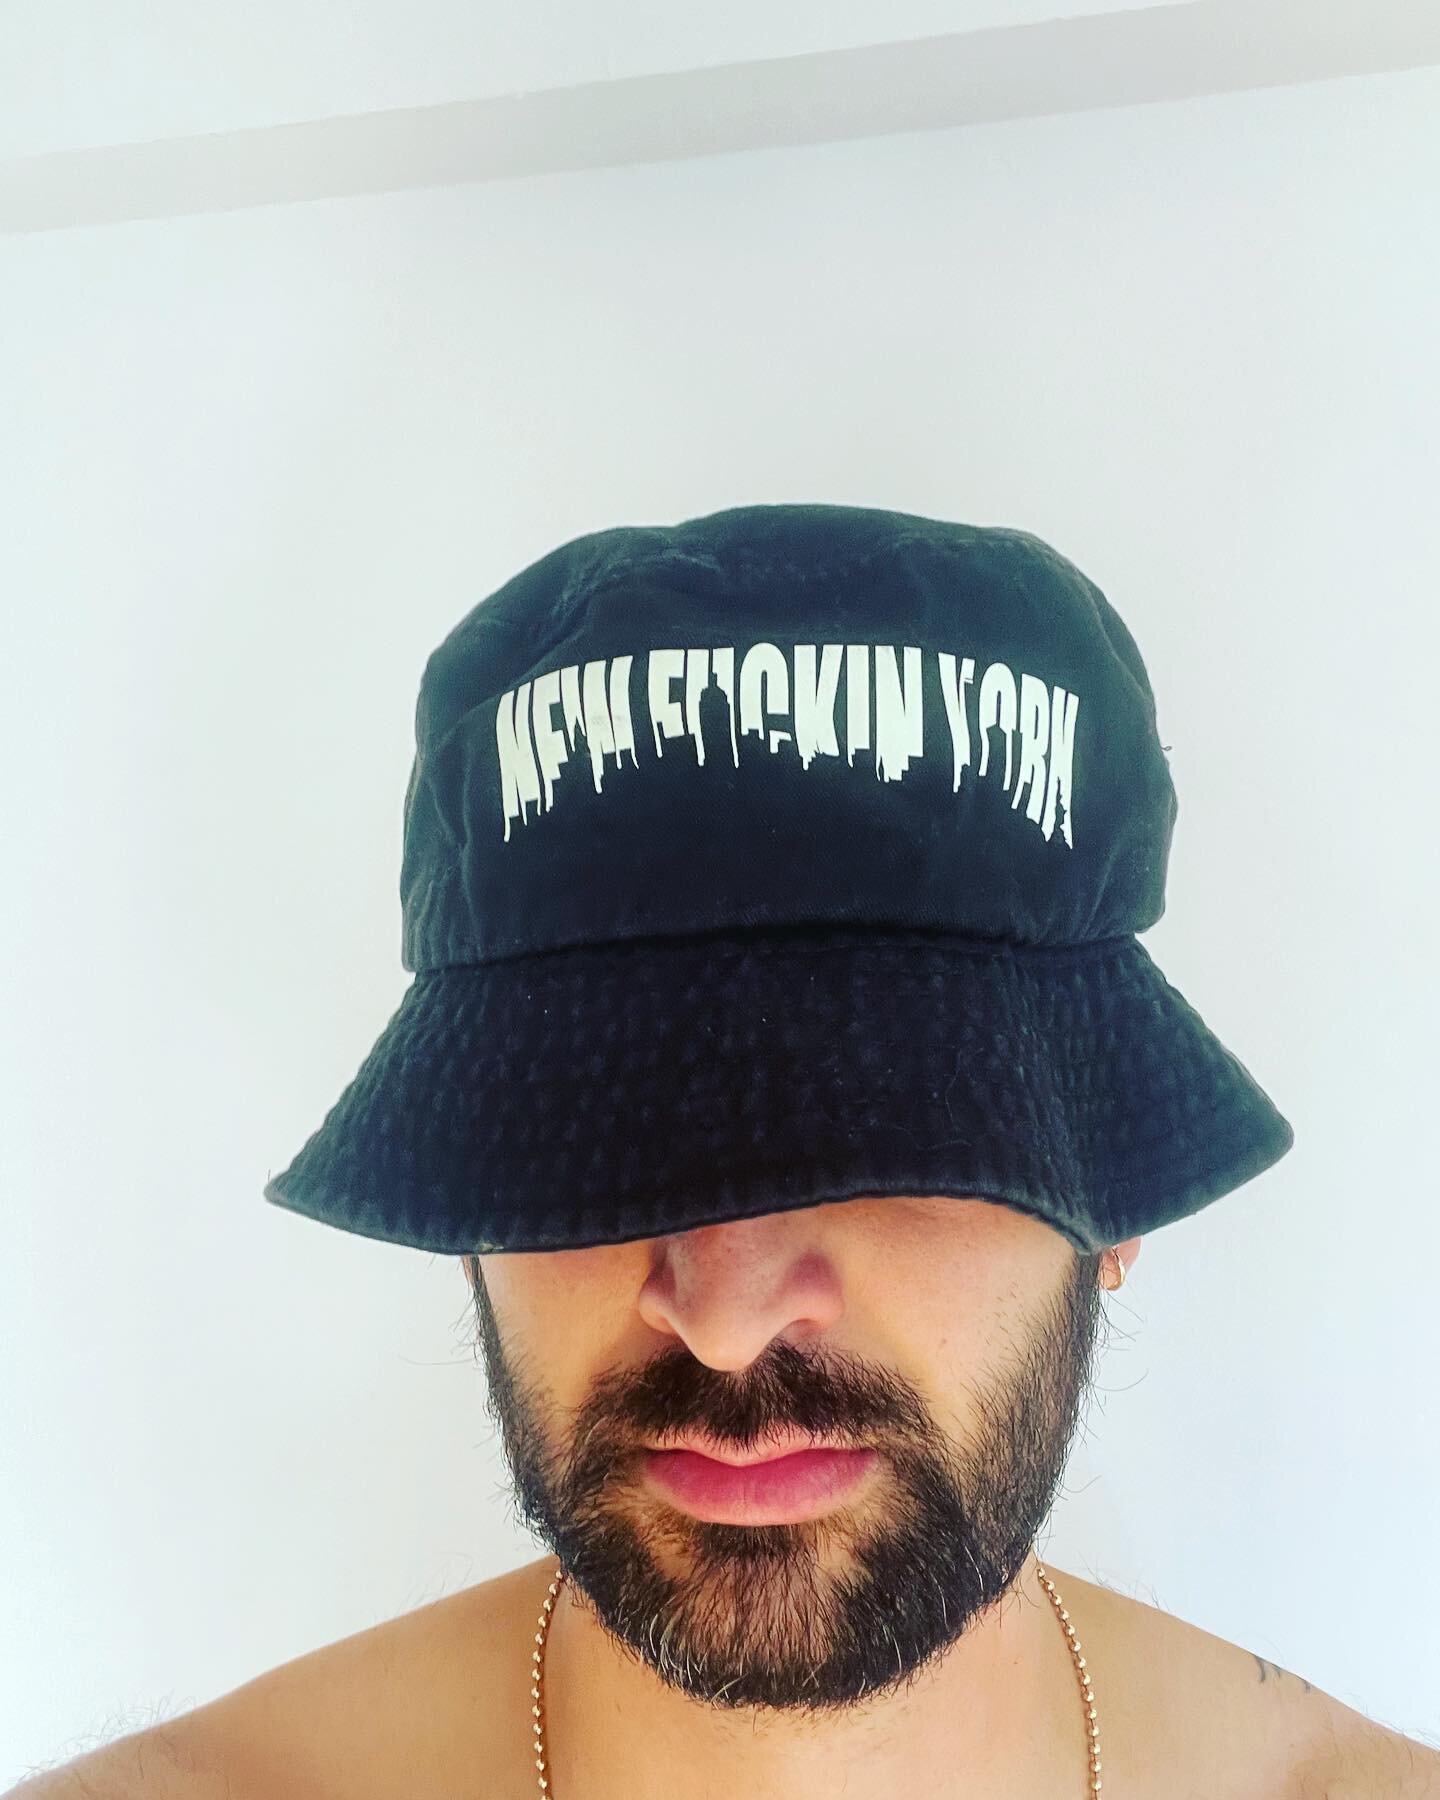 NEW SWAG - &ldquo;Tourist Hat&rdquo; 2022 &ldquo;New Fuckin York&rdquo; glo-in-the-dark ink &hellip; Been working on these for a while partly as an homage to the ever disappearing tourist shops on canal street which are being replaced with soho bouti